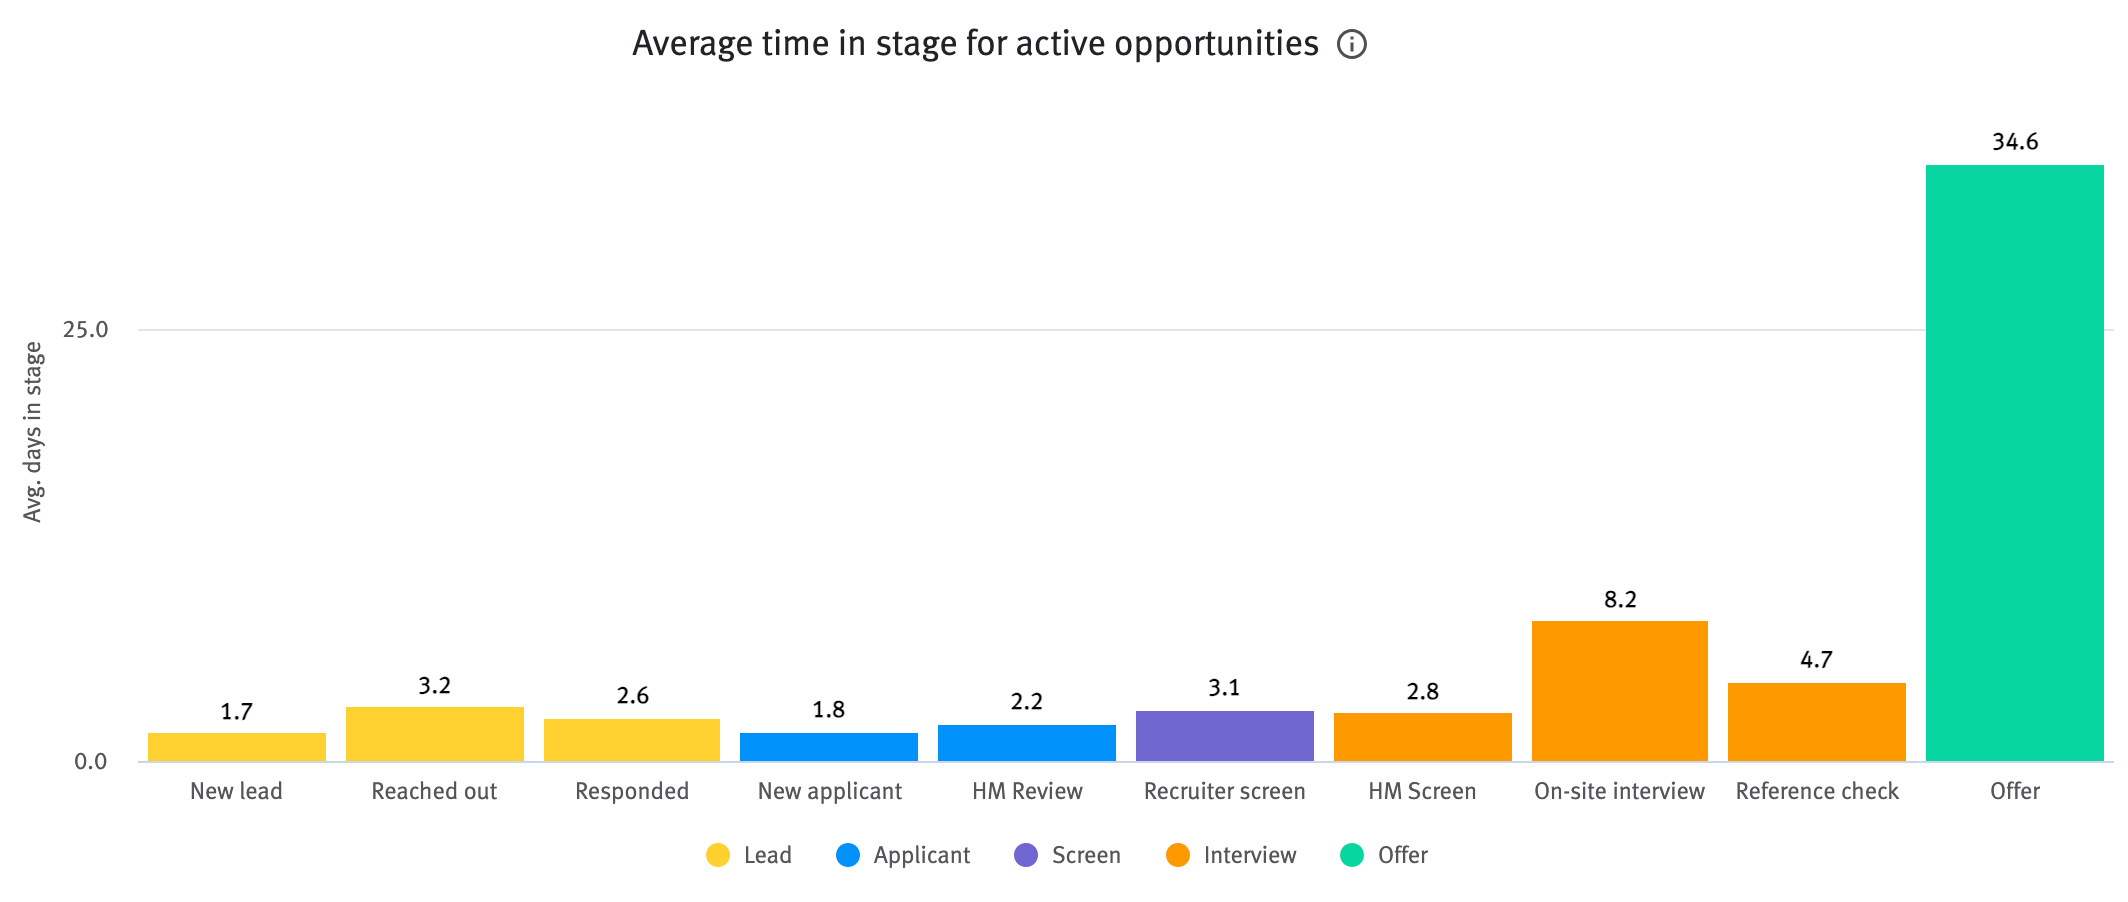 Average time in stage for active opportunities chart